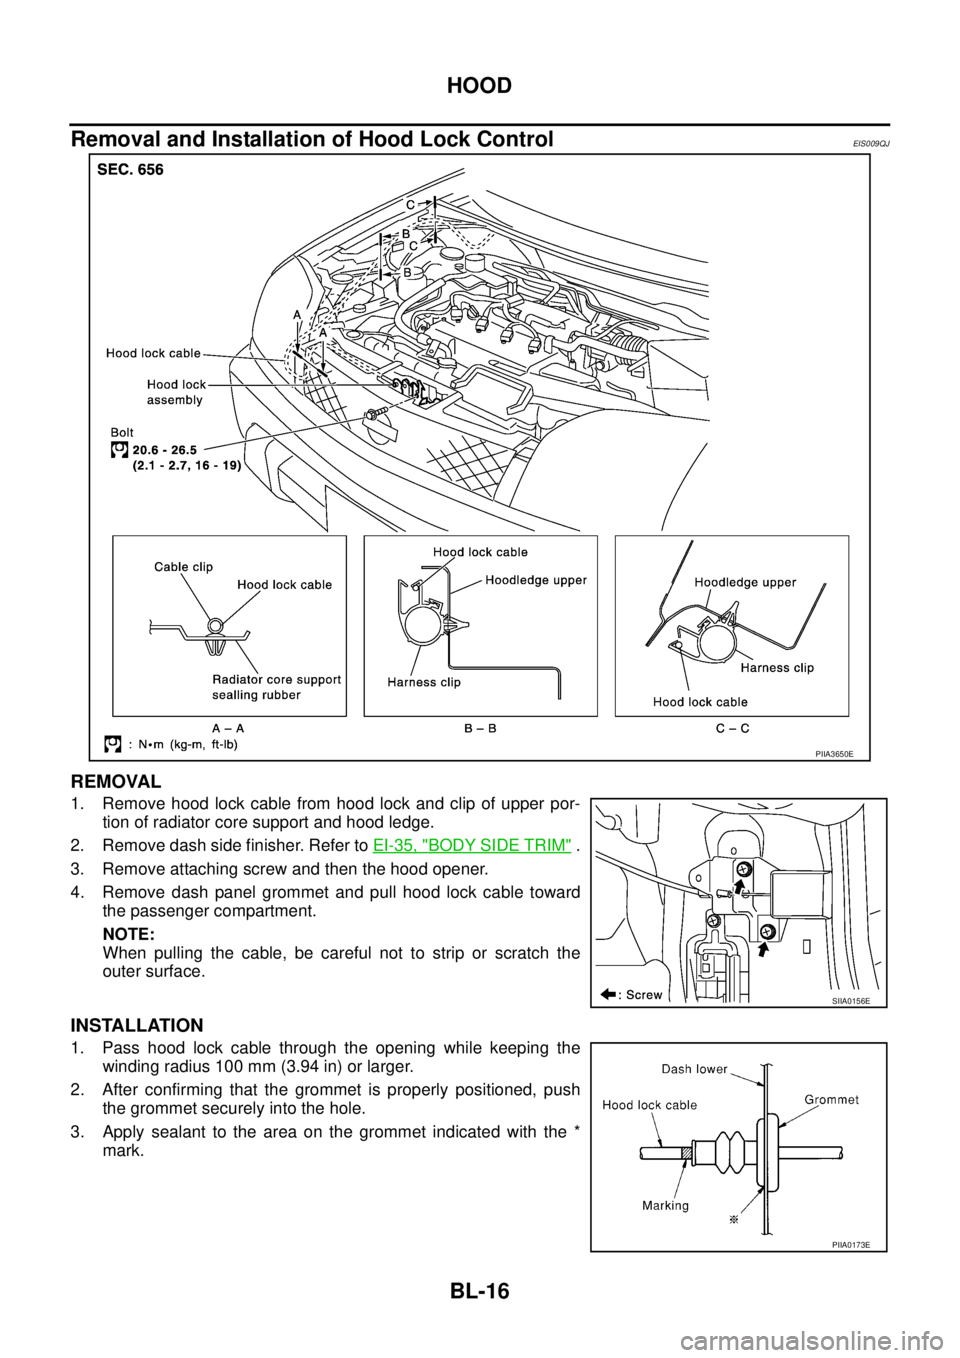 NISSAN X-TRAIL 2003  Service Repair Manual BL-16
HOOD
 
Removal and Installation of Hood Lock ControlEIS009QJ
REMOVAL
1. Remove hood lock cable from hood lock and clip of upper por-
tion of radiator core support and hood ledge.
2. Remove dash 